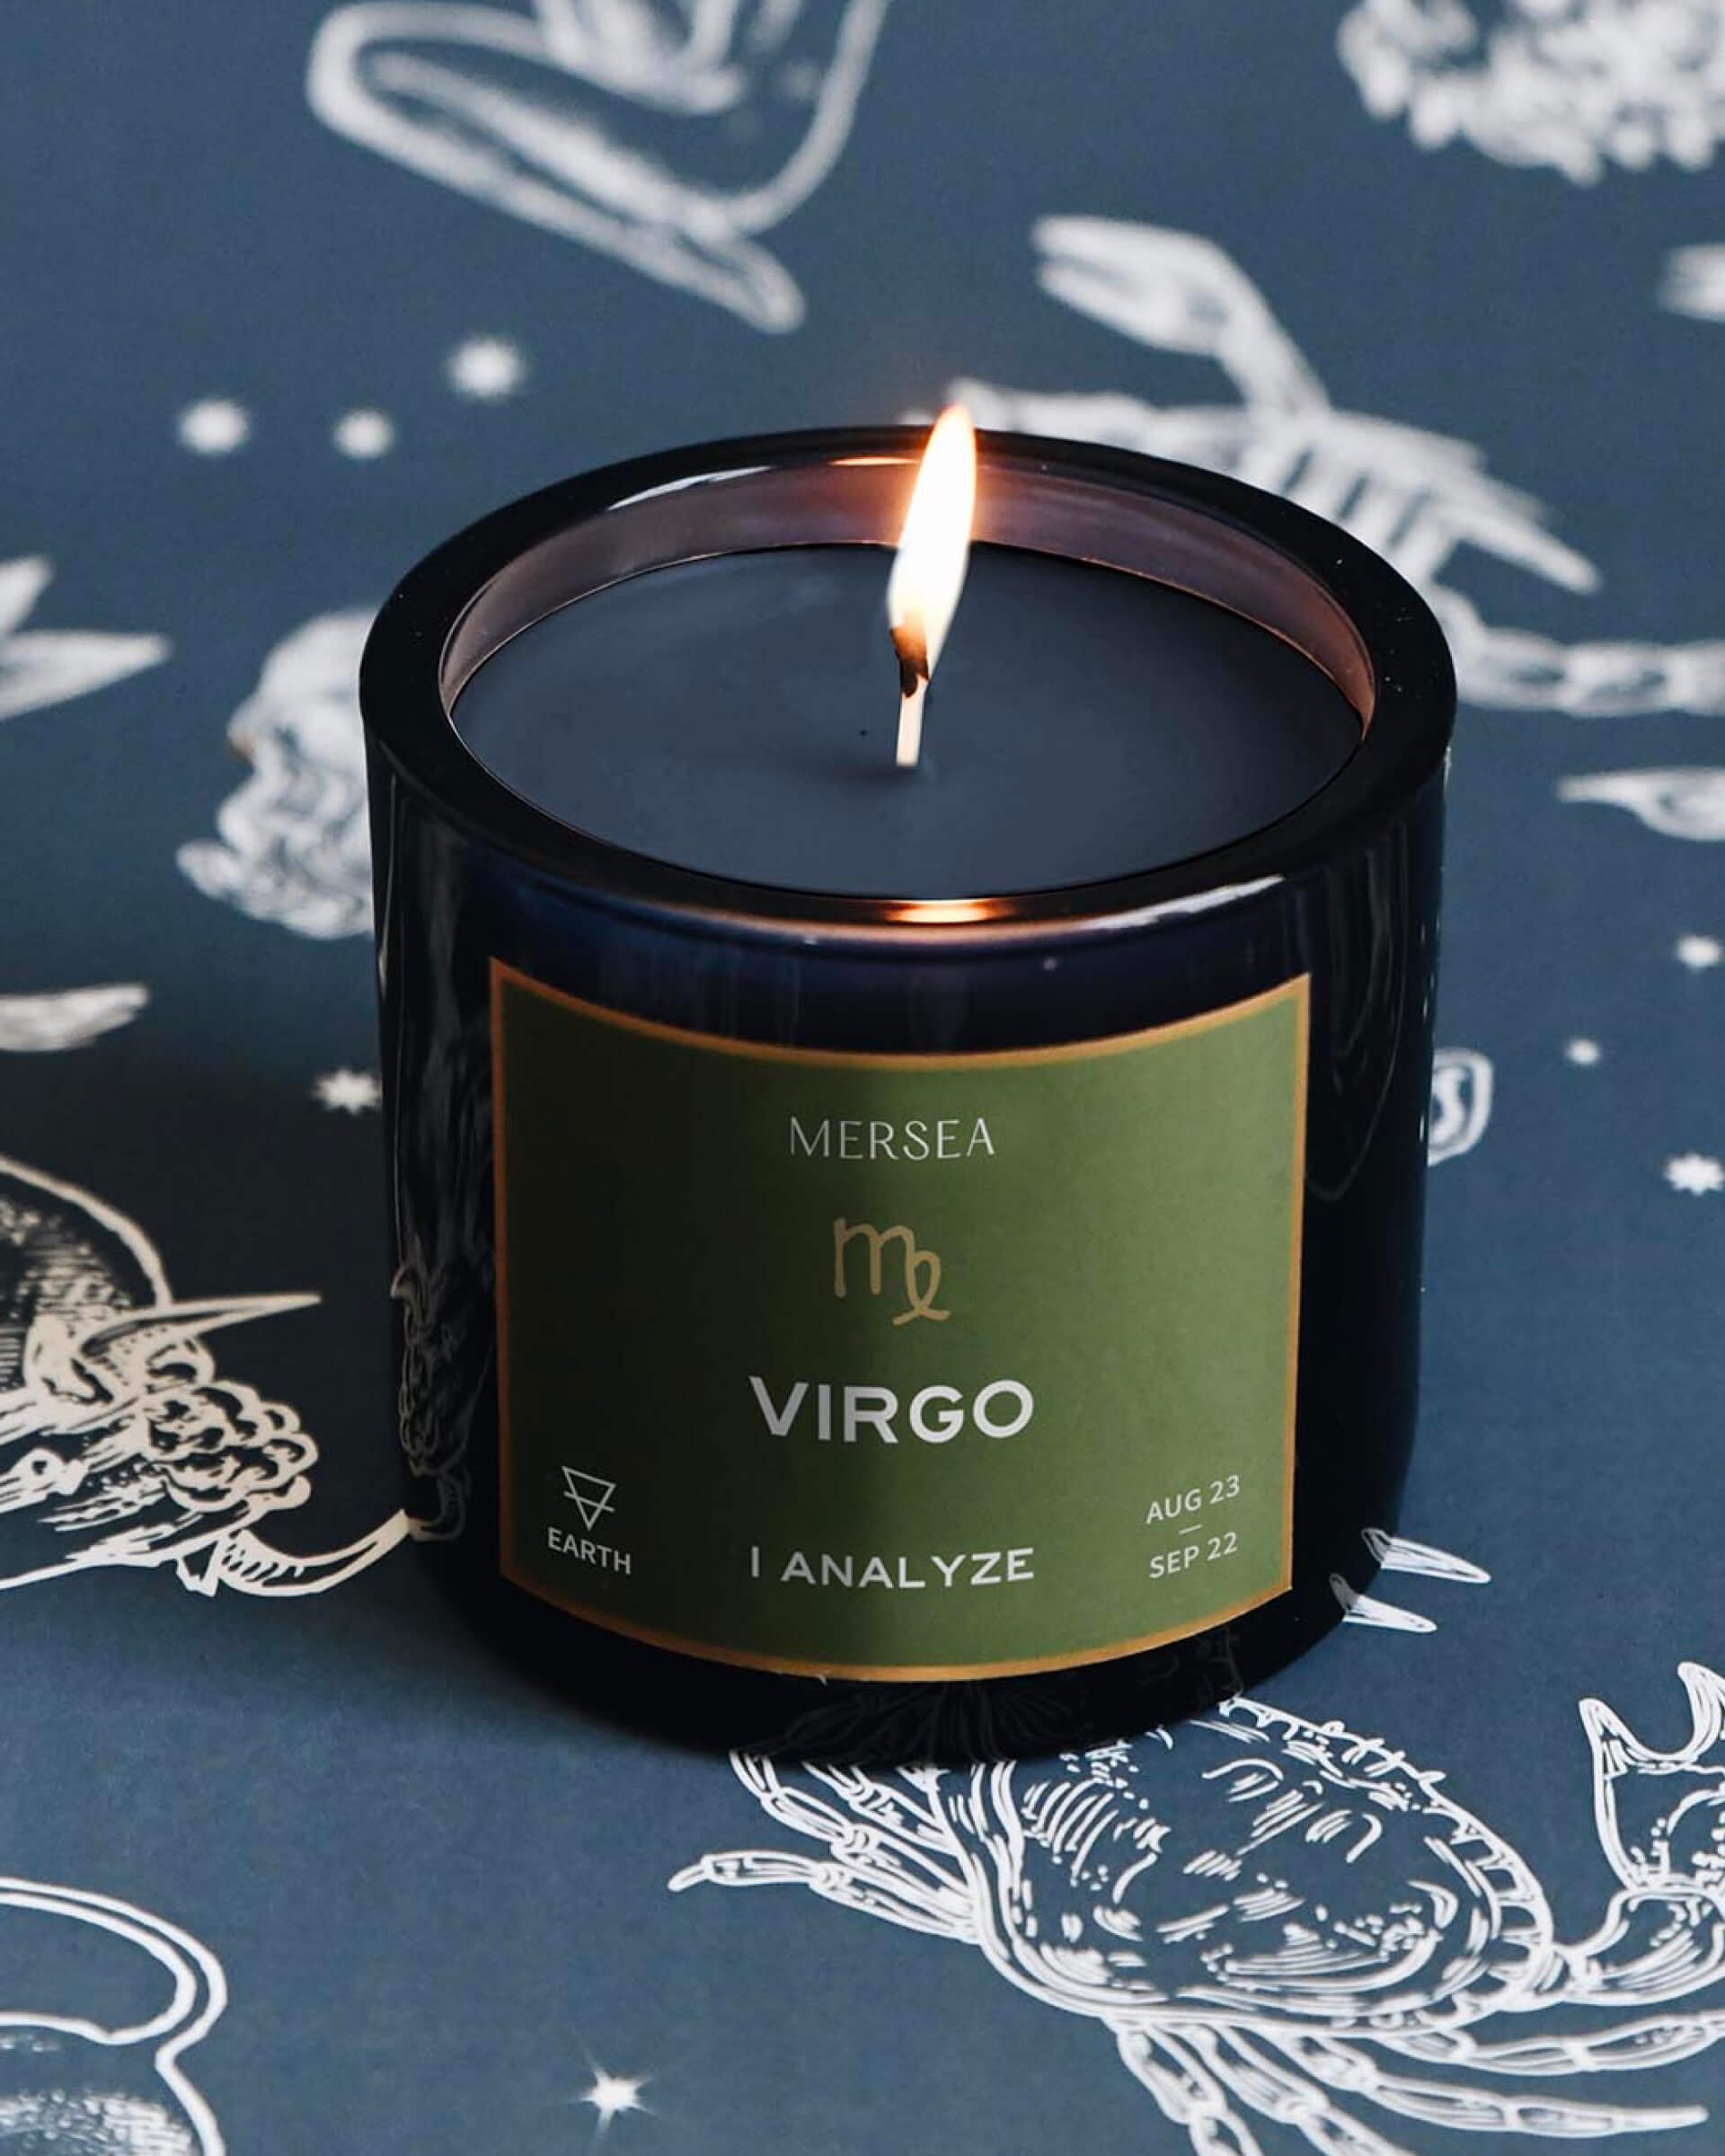 Mersea Virgo candle against astrology sign background